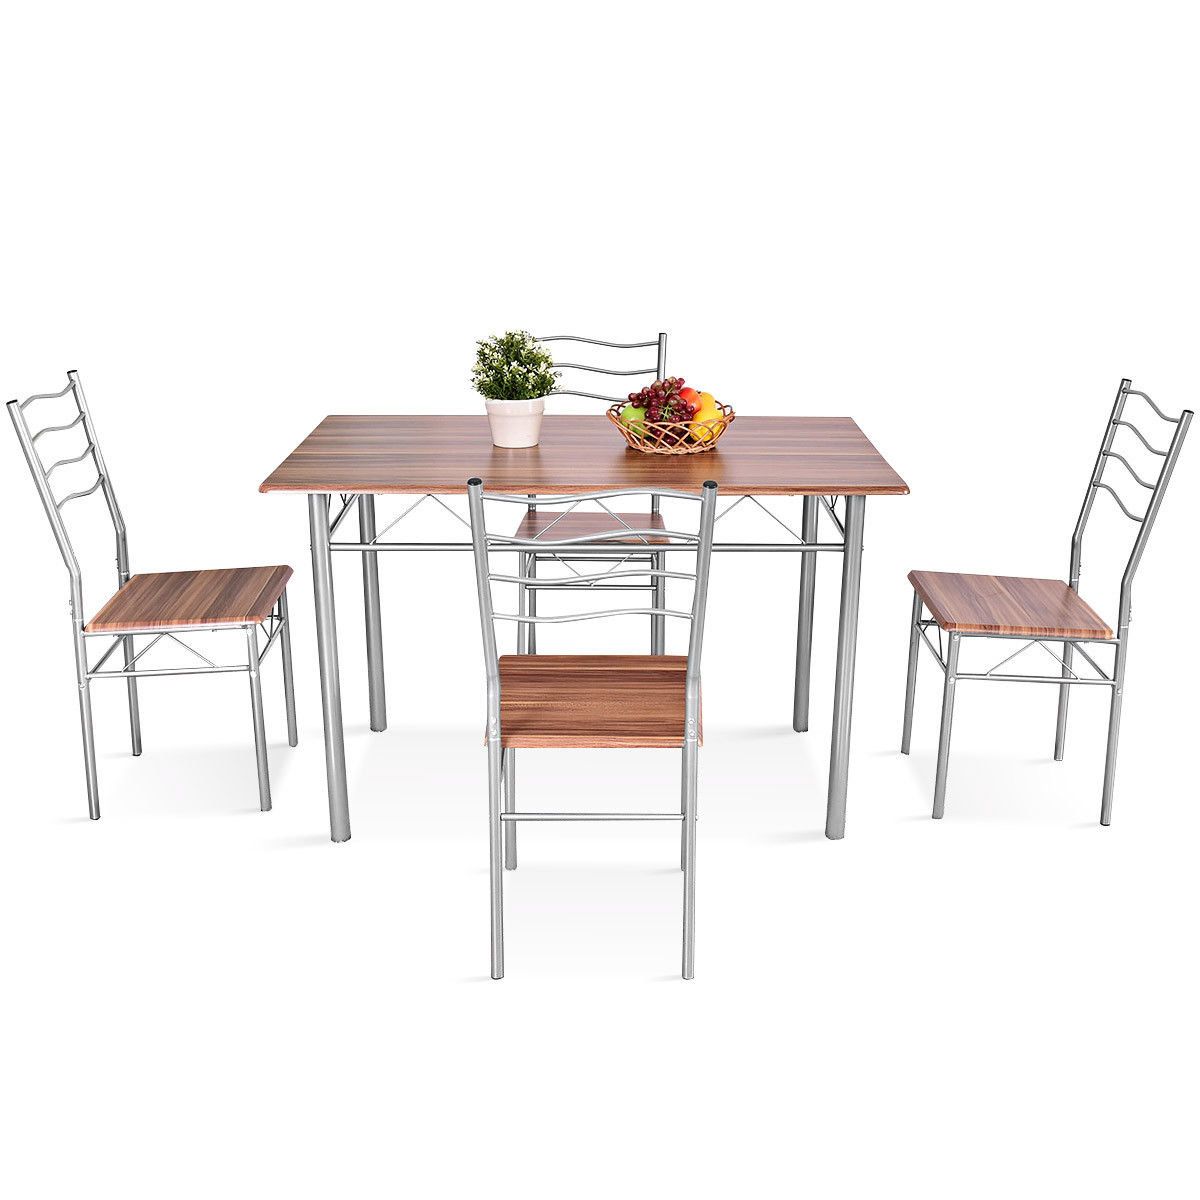 Details About Winston Porter Miskell 5 Piece Dining Set Throughout 2018 Miskell 5 Piece Dining Sets (View 3 of 20)